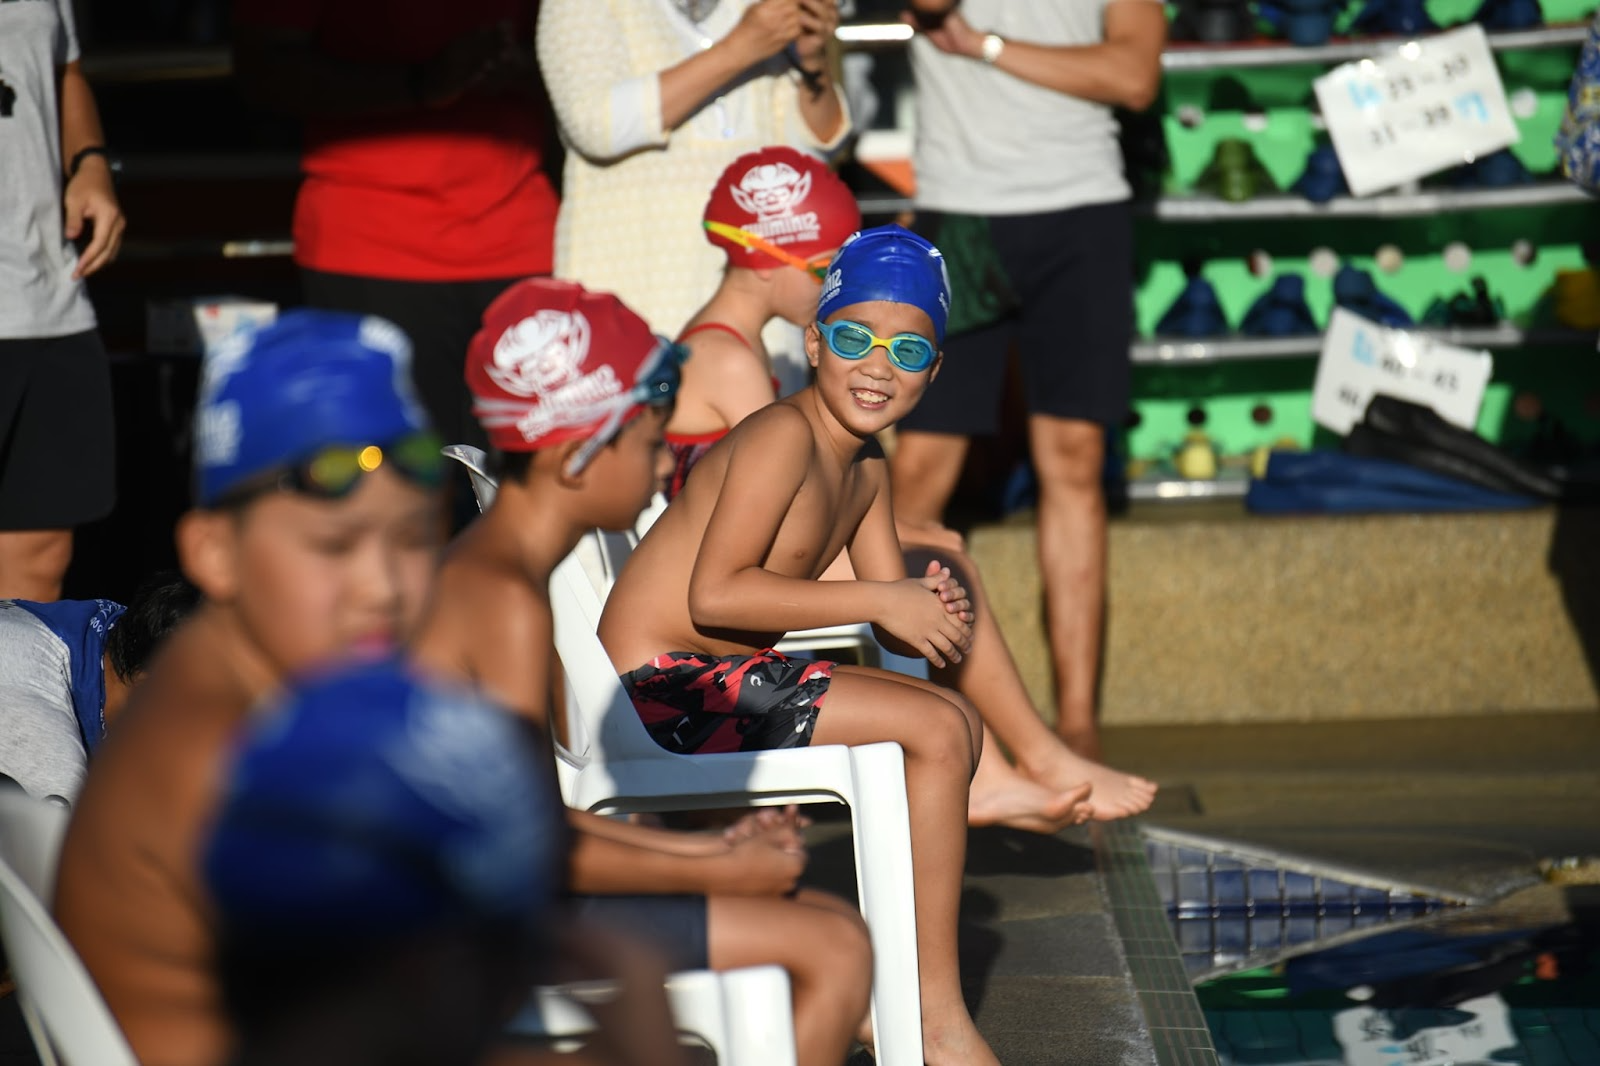 Swimin12 is bringing back its annual sports day with more excitement and events  | weirdkaya